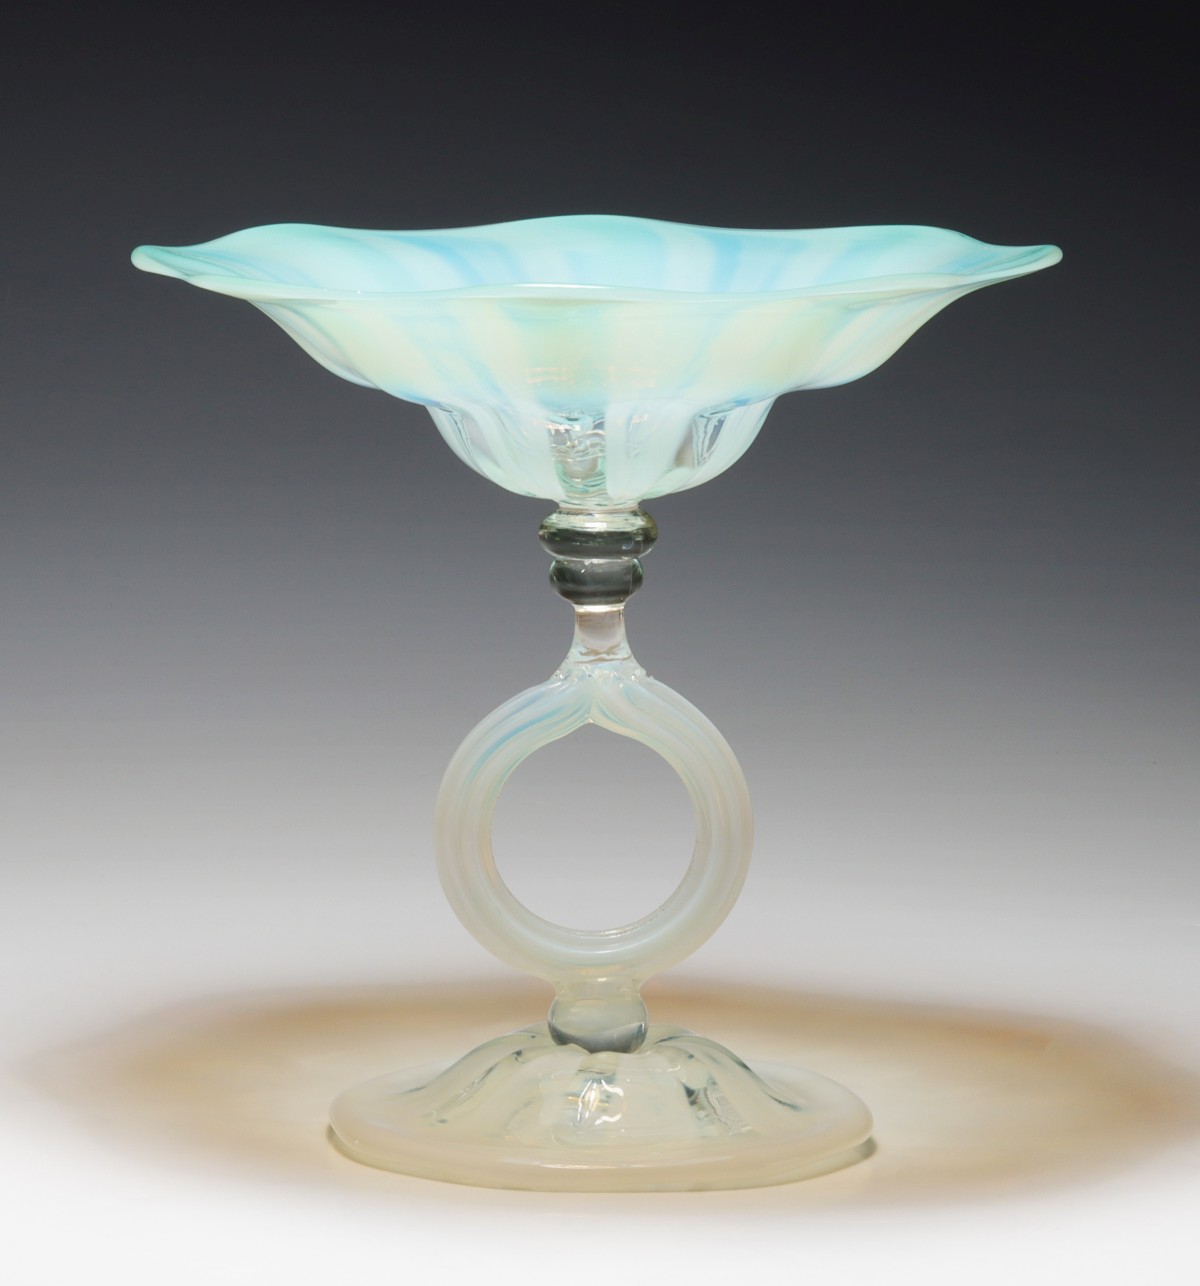 A PASTEL GLASS WEDDING RING COMPOTE SIGNED TIFFANY